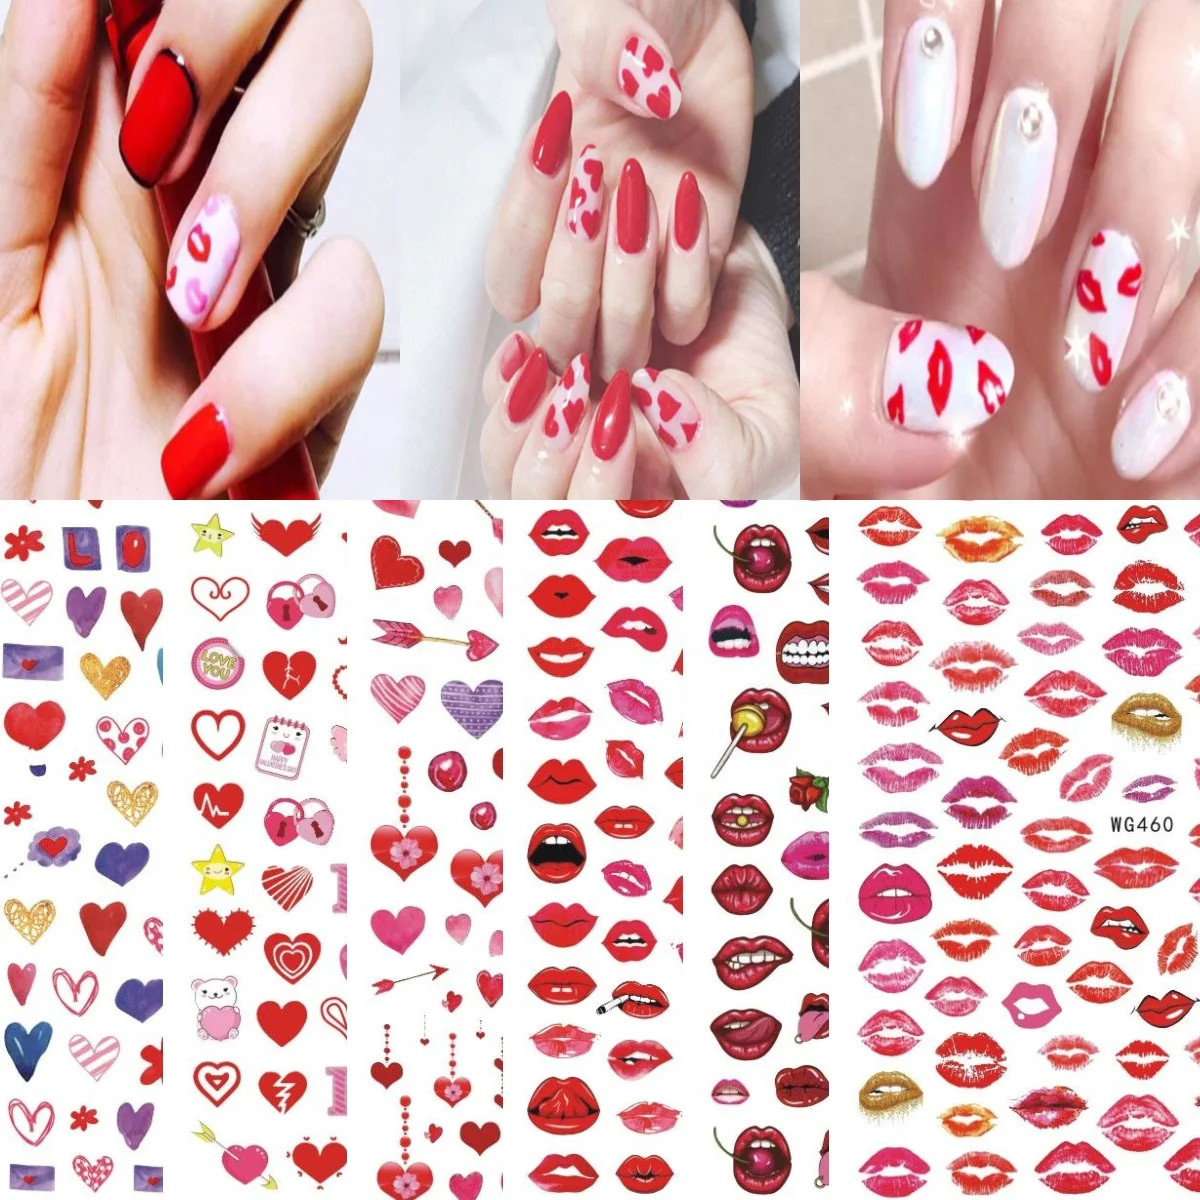 

Paso Sico WG334-461 New Heart Colorful Red Lip Series Nail Decals Stickers for Wedding Valentine's Day Nail Art Decoration